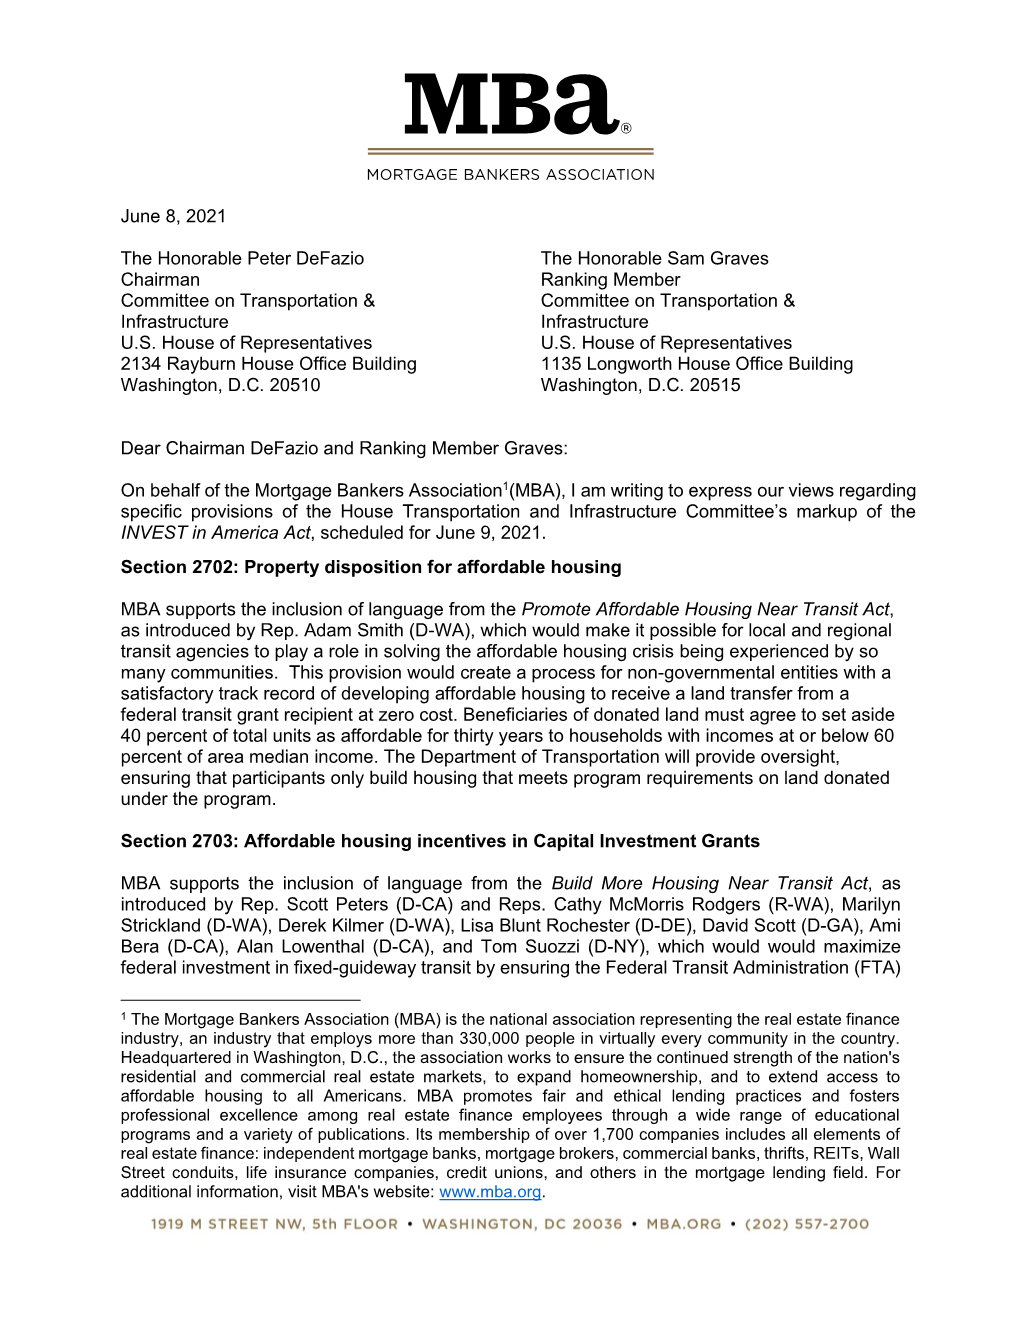 MBA Letter on 6/9 House Transportation and Infrastructure